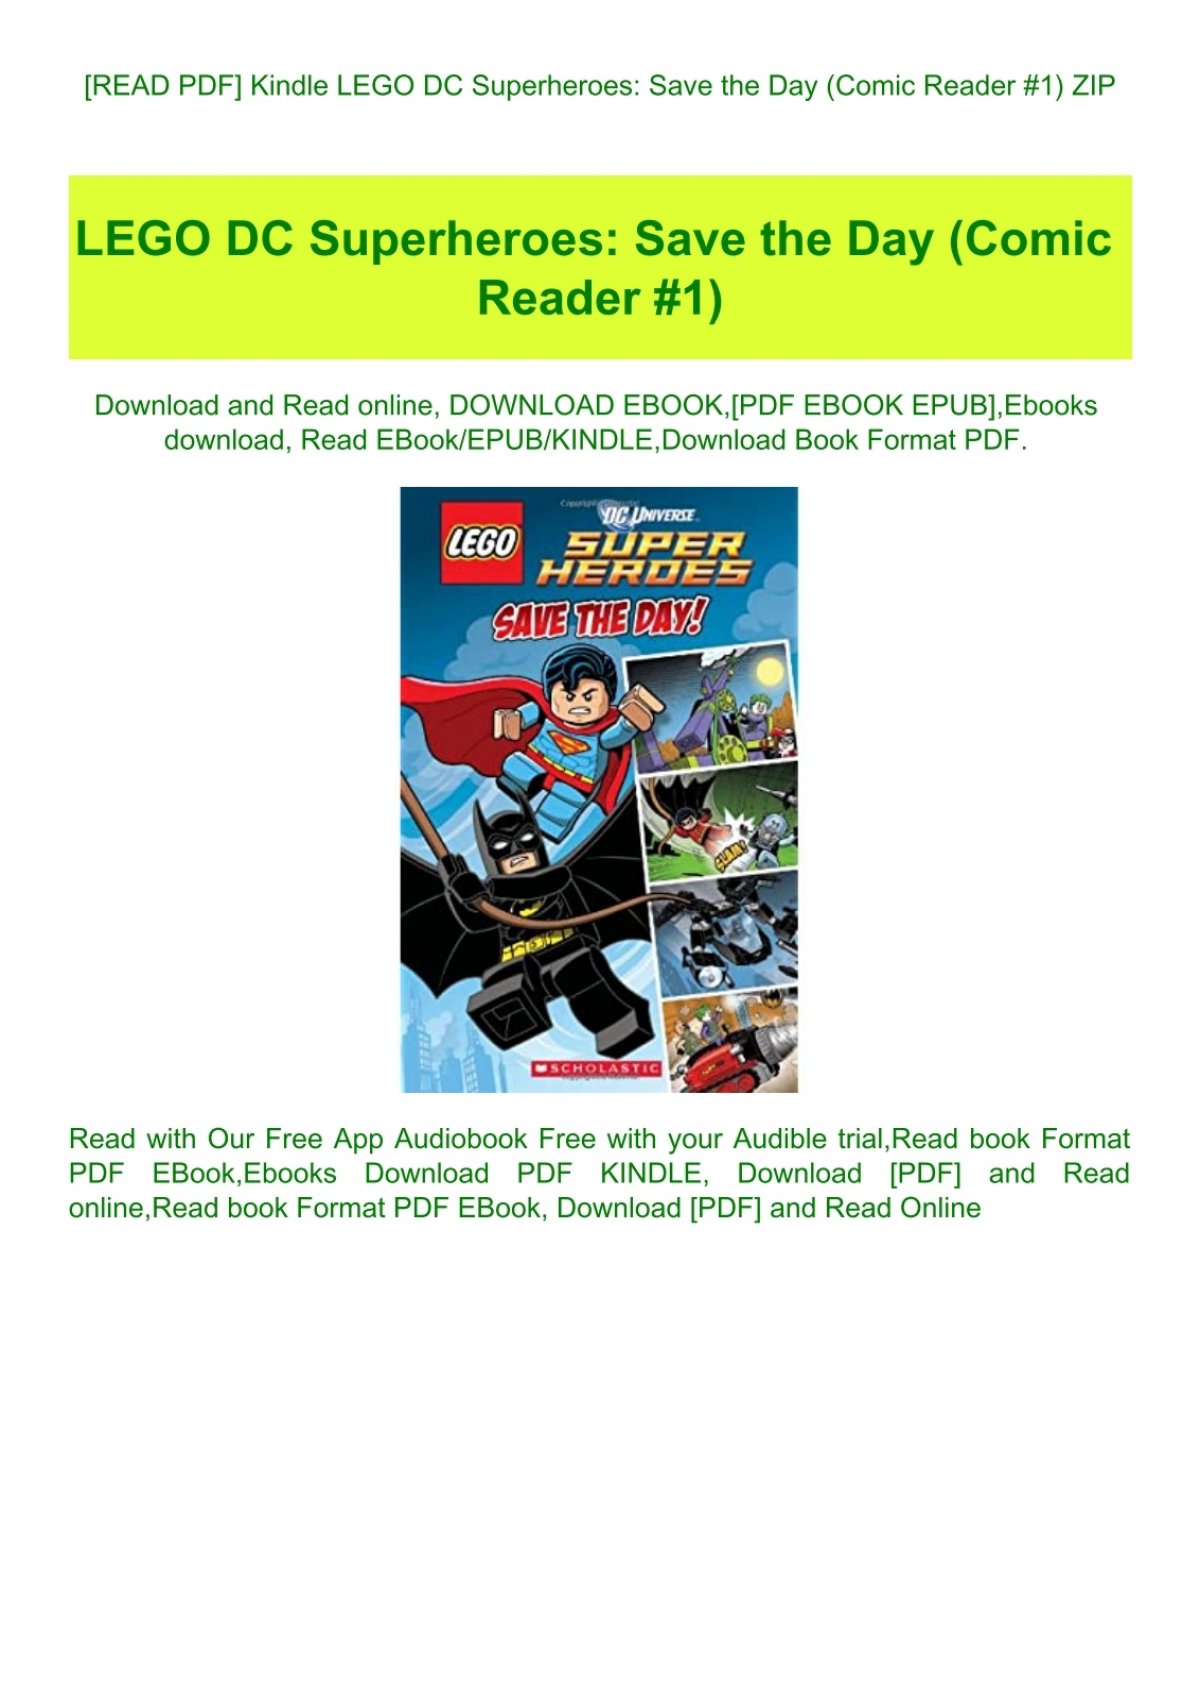 Read Pdf Kindle Lego Dc Superheroes Save The Day Comic Reader 1 Zip